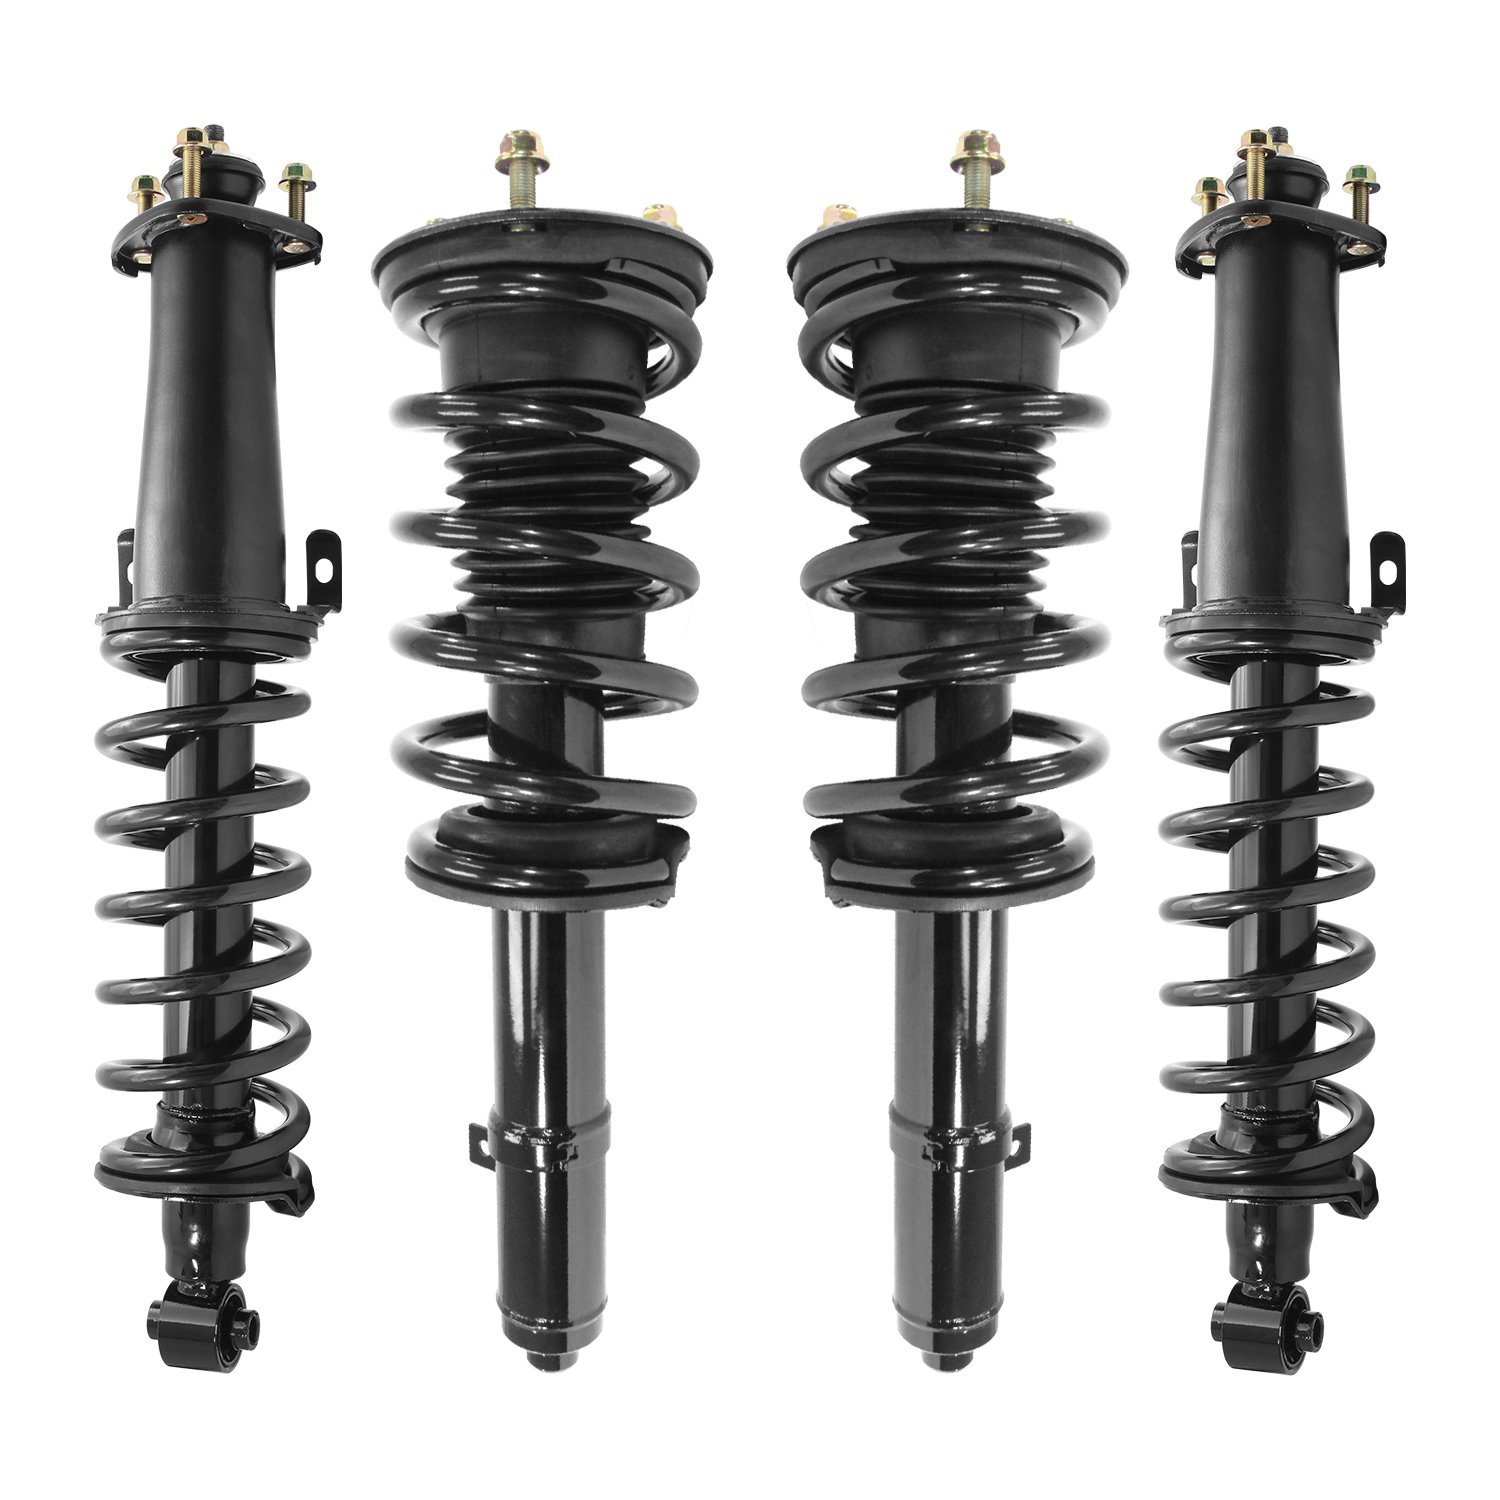 4-11835-15210-001 Front & Rear Suspension Strut & Coil Spring Assembly Kit Fits Select Lexus IS250, Lexus IS350